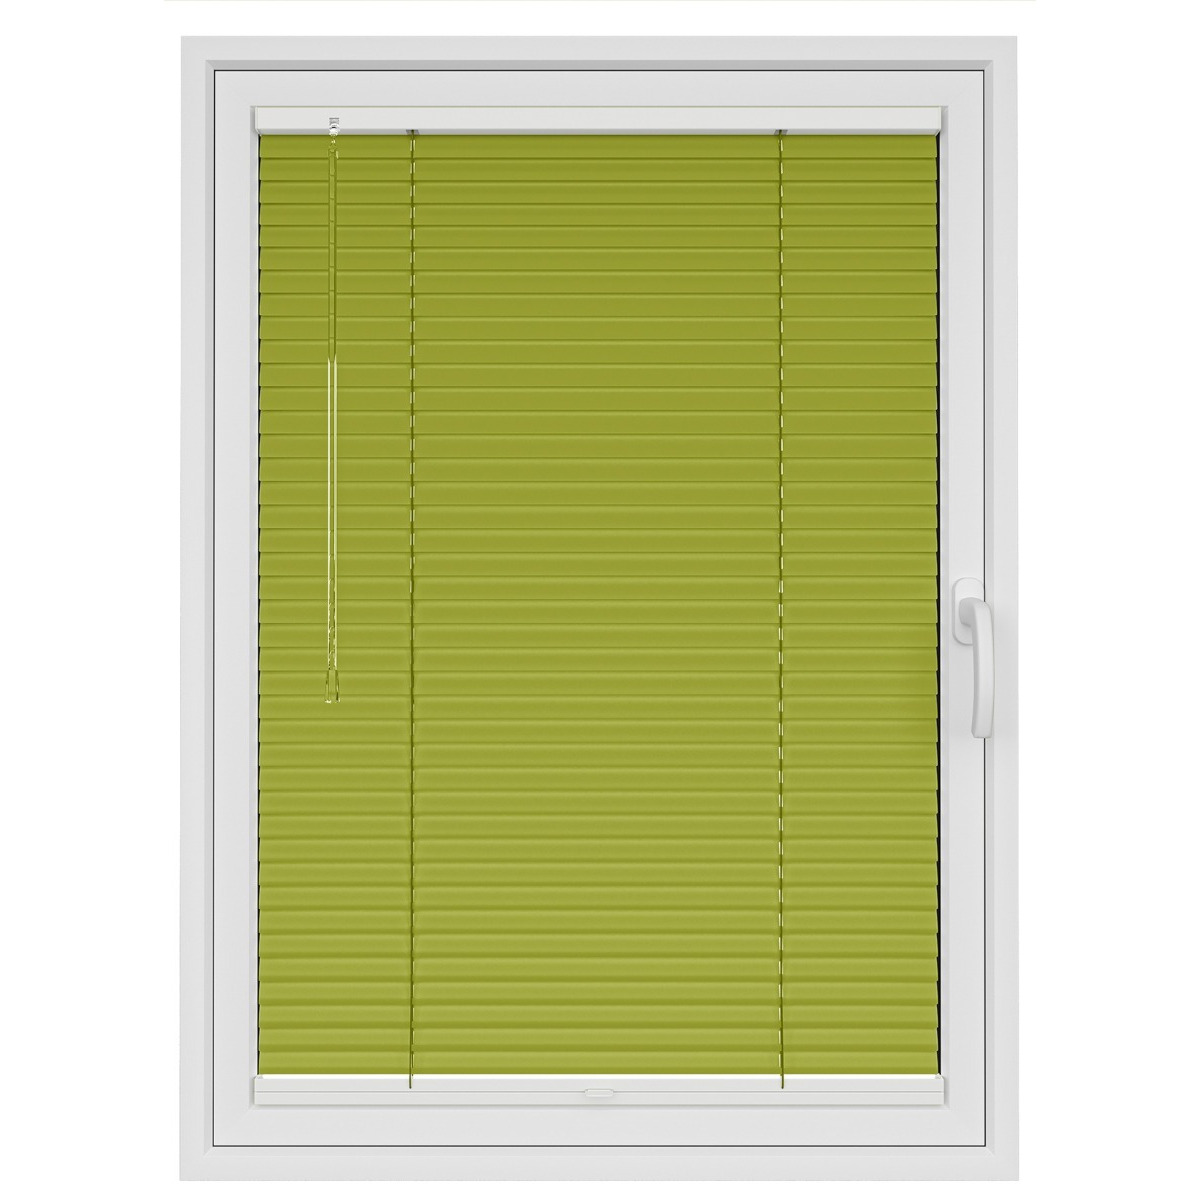 Lime Green Clic Fit - image 1